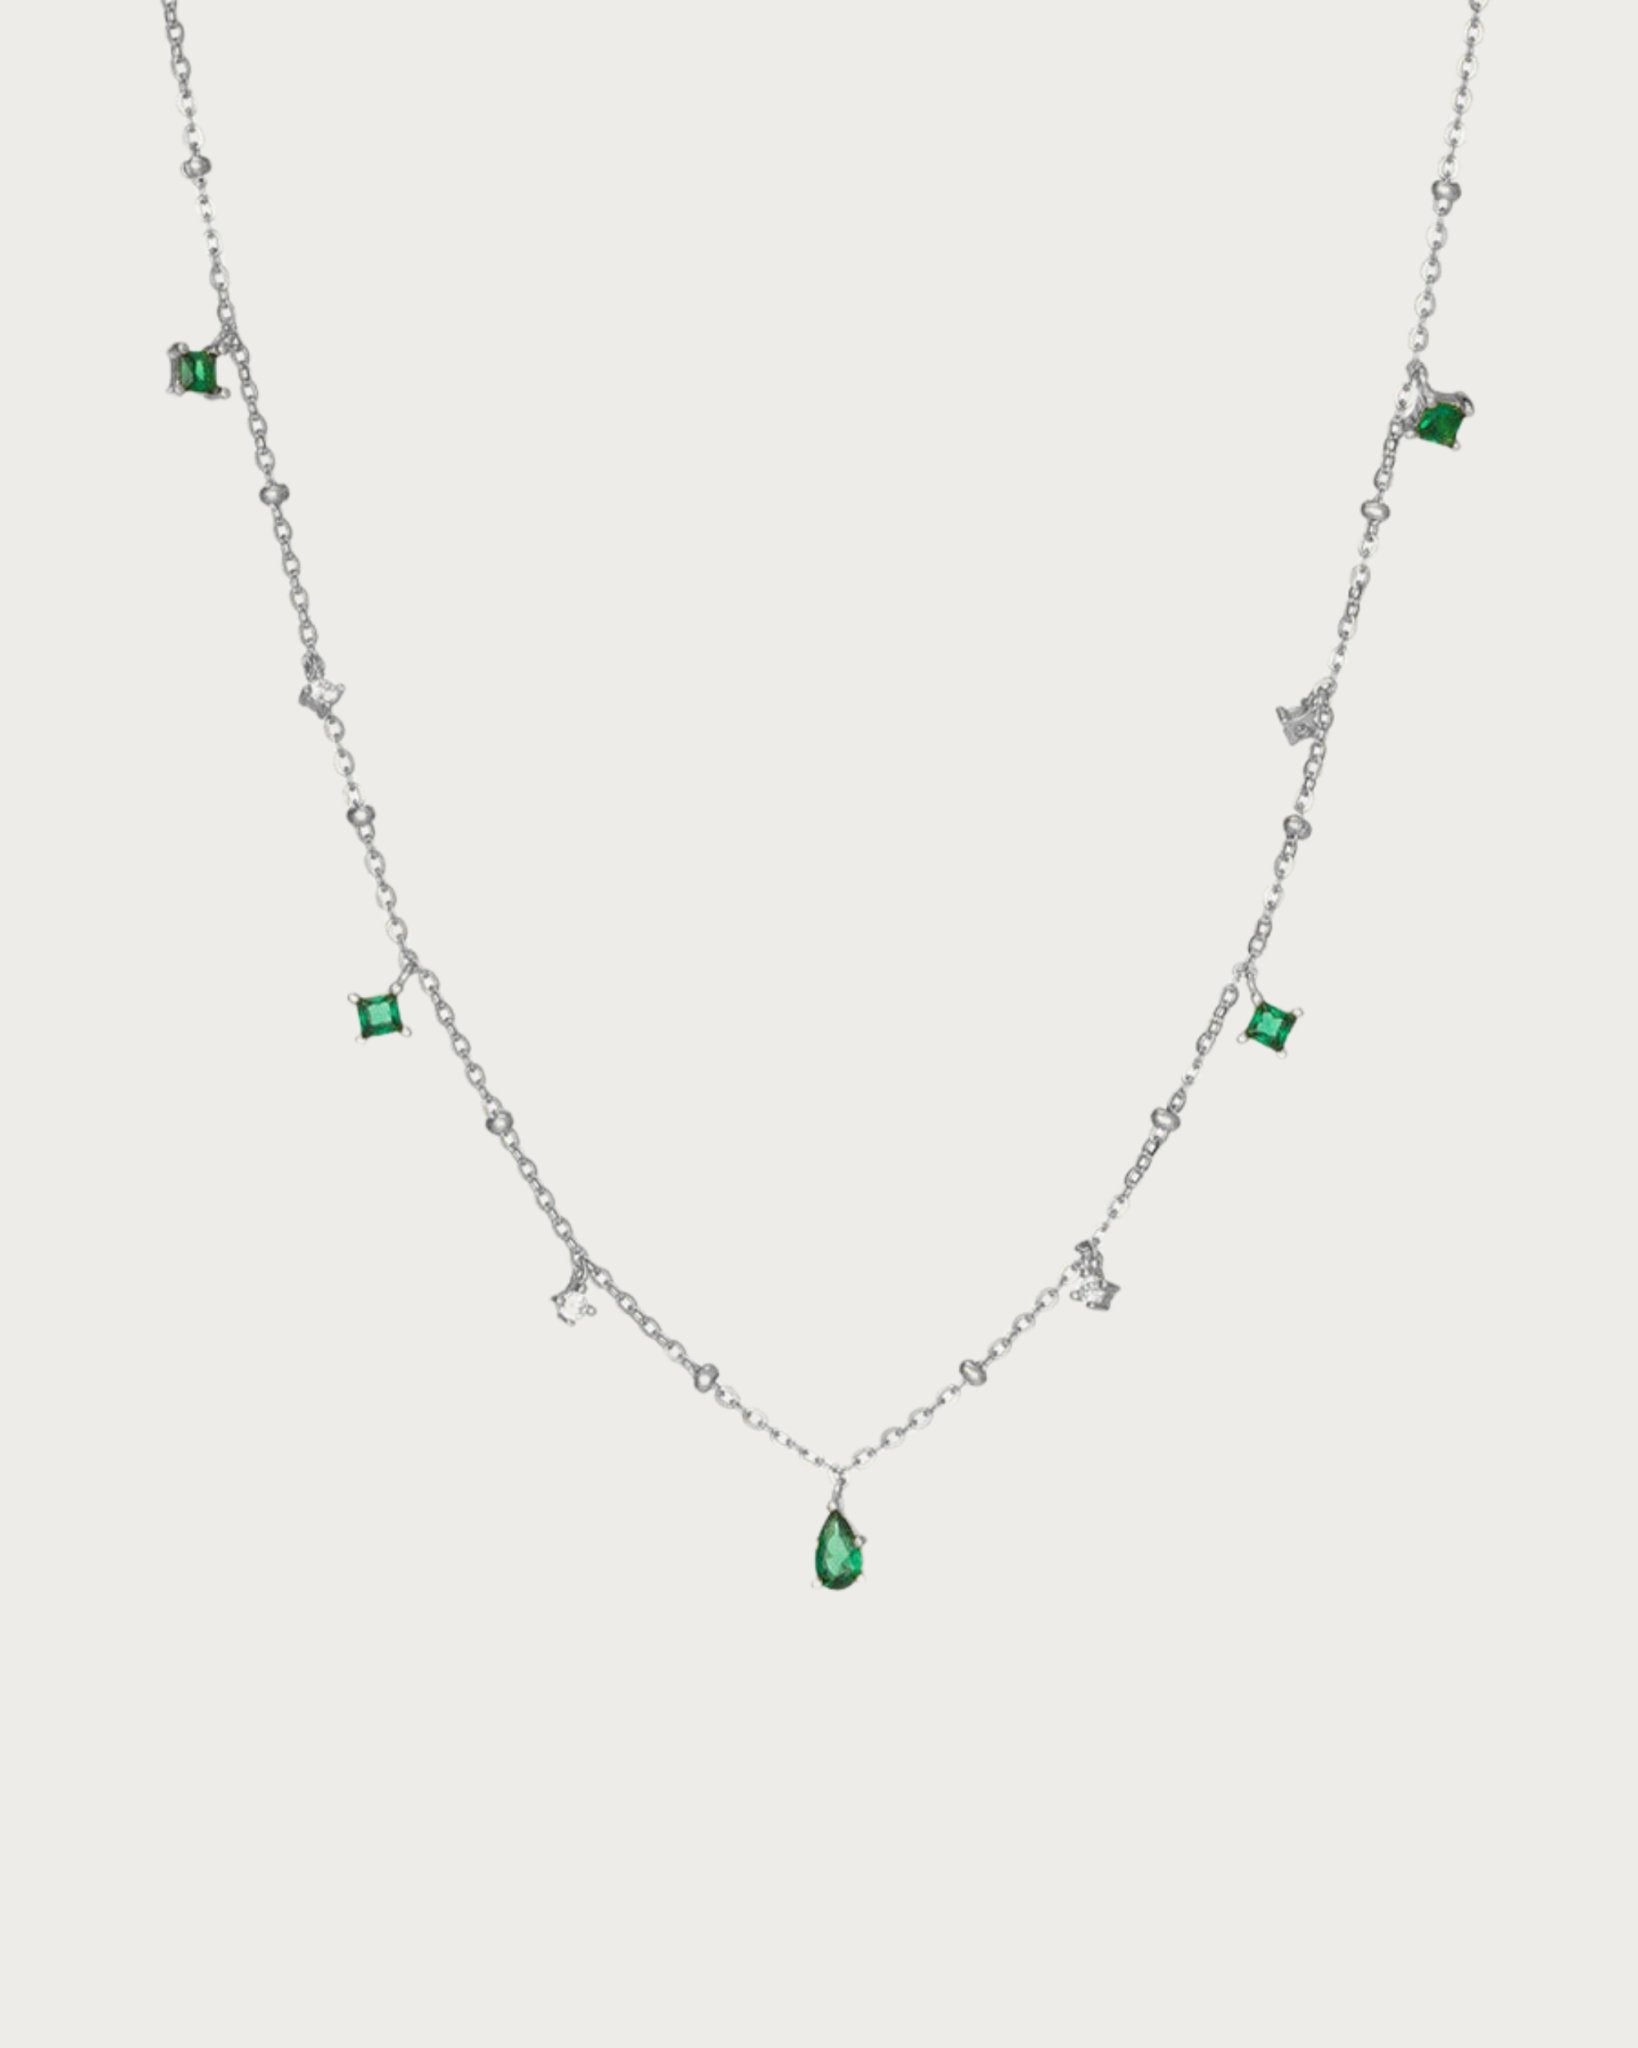 Silver Elysee Collier in Emerald Green